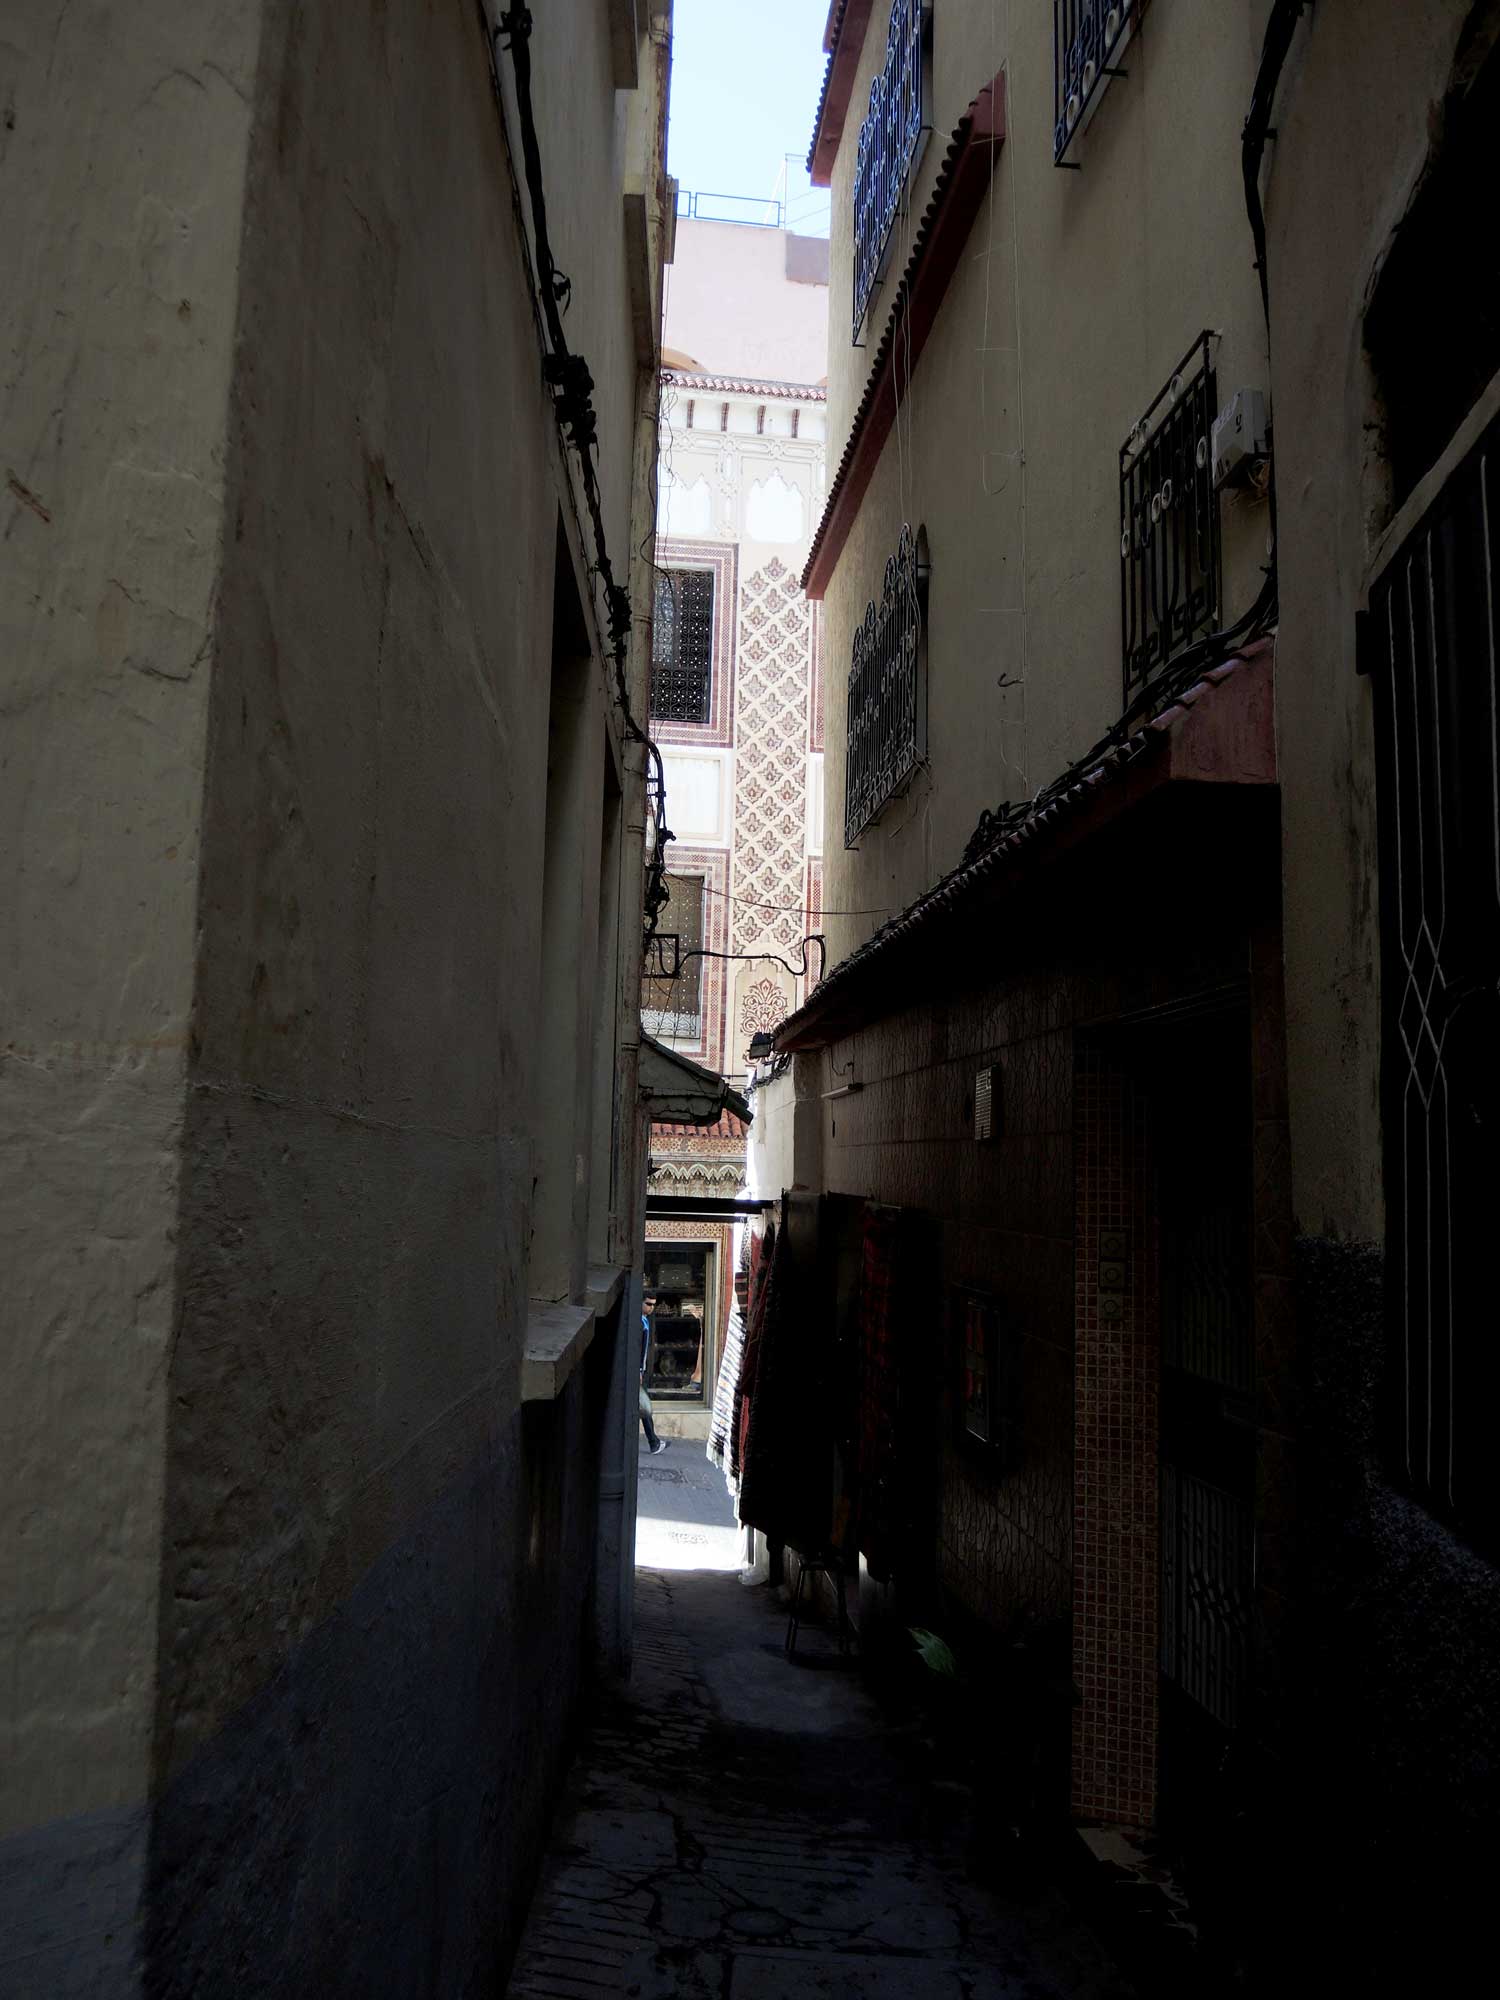 Zankat Siaghine - Northward view of an alley toward rue Saighine